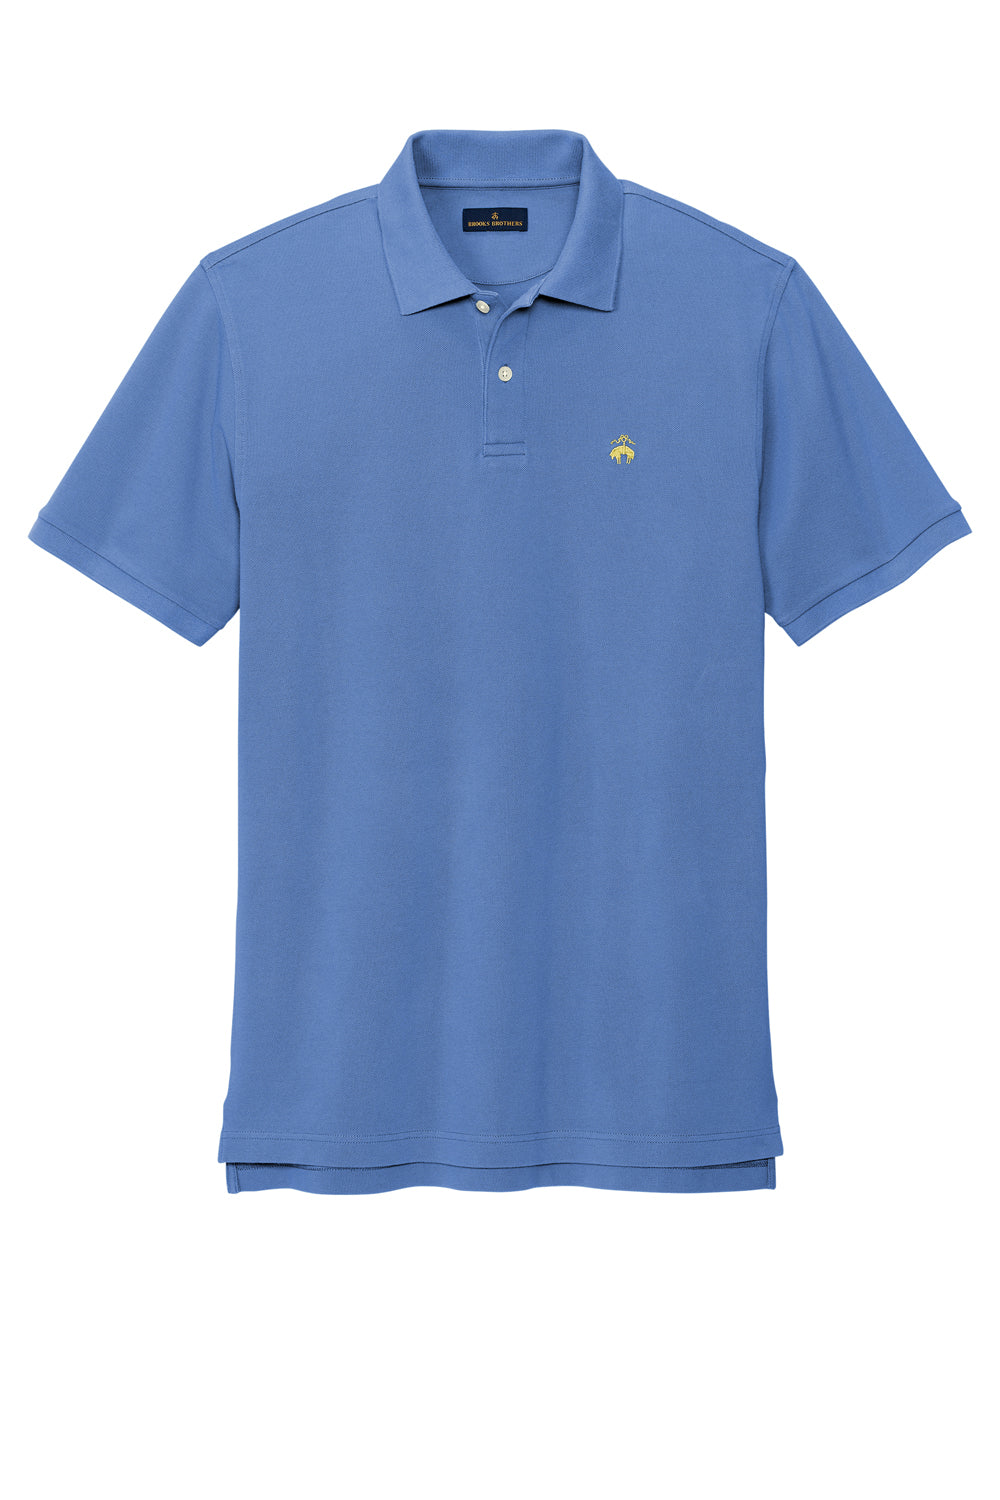 Brooks Brothers Mens Pique Short Sleeve Polo Shirt Charter Blue Flat Front